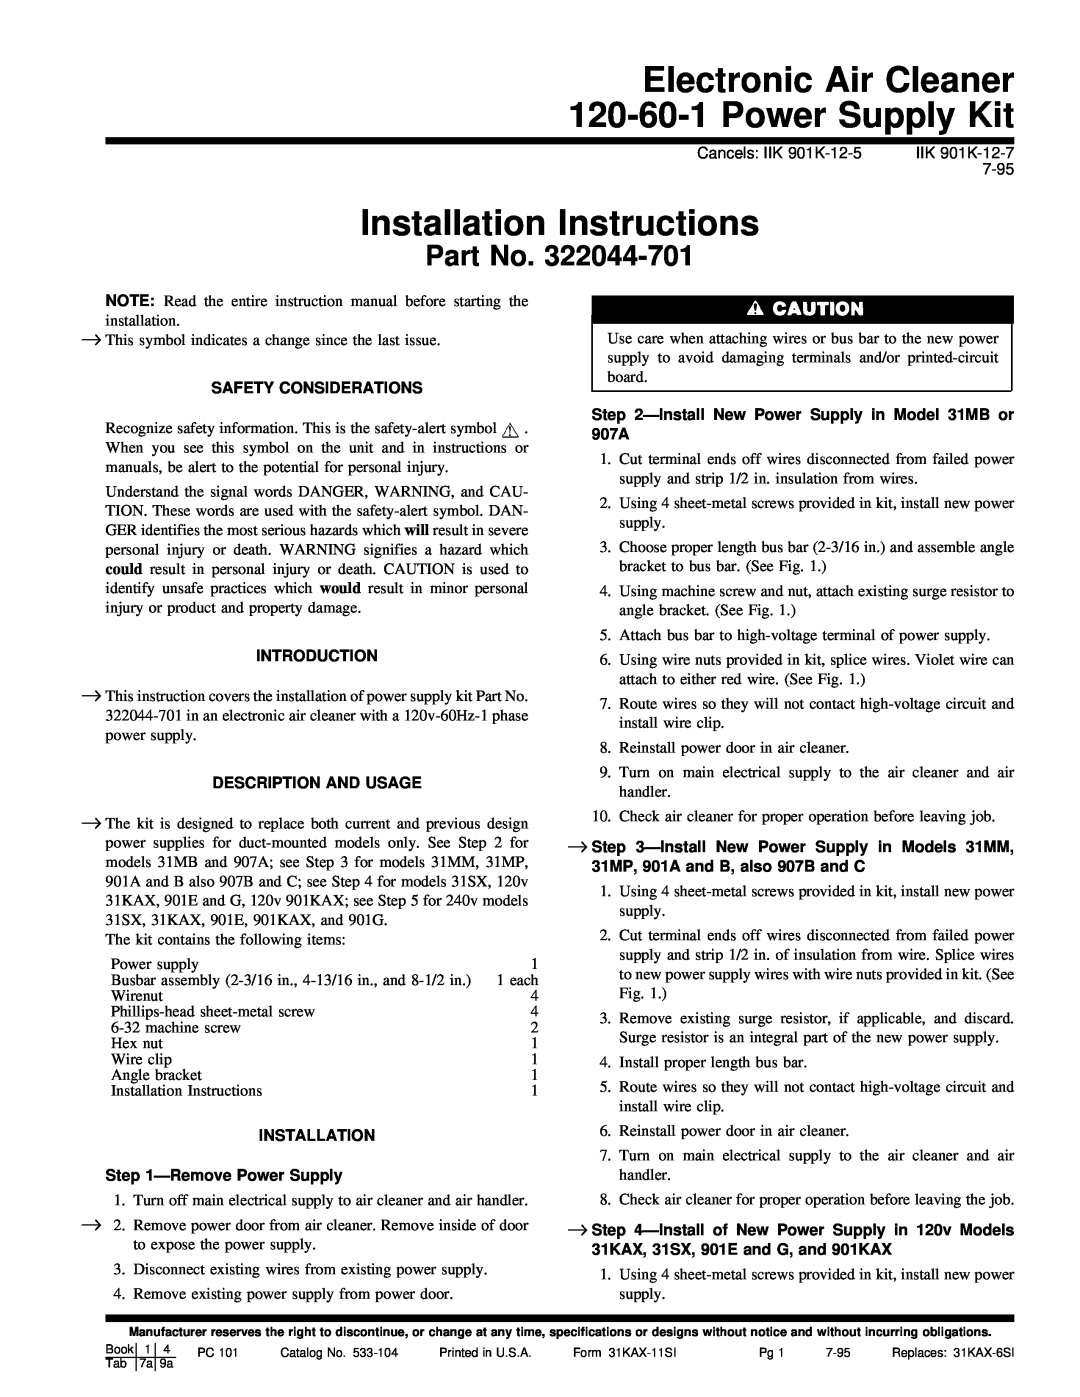 Carrier installation instructions Installation Instructions, Electronic Air Cleaner 120-60-1Power Supply Kit 